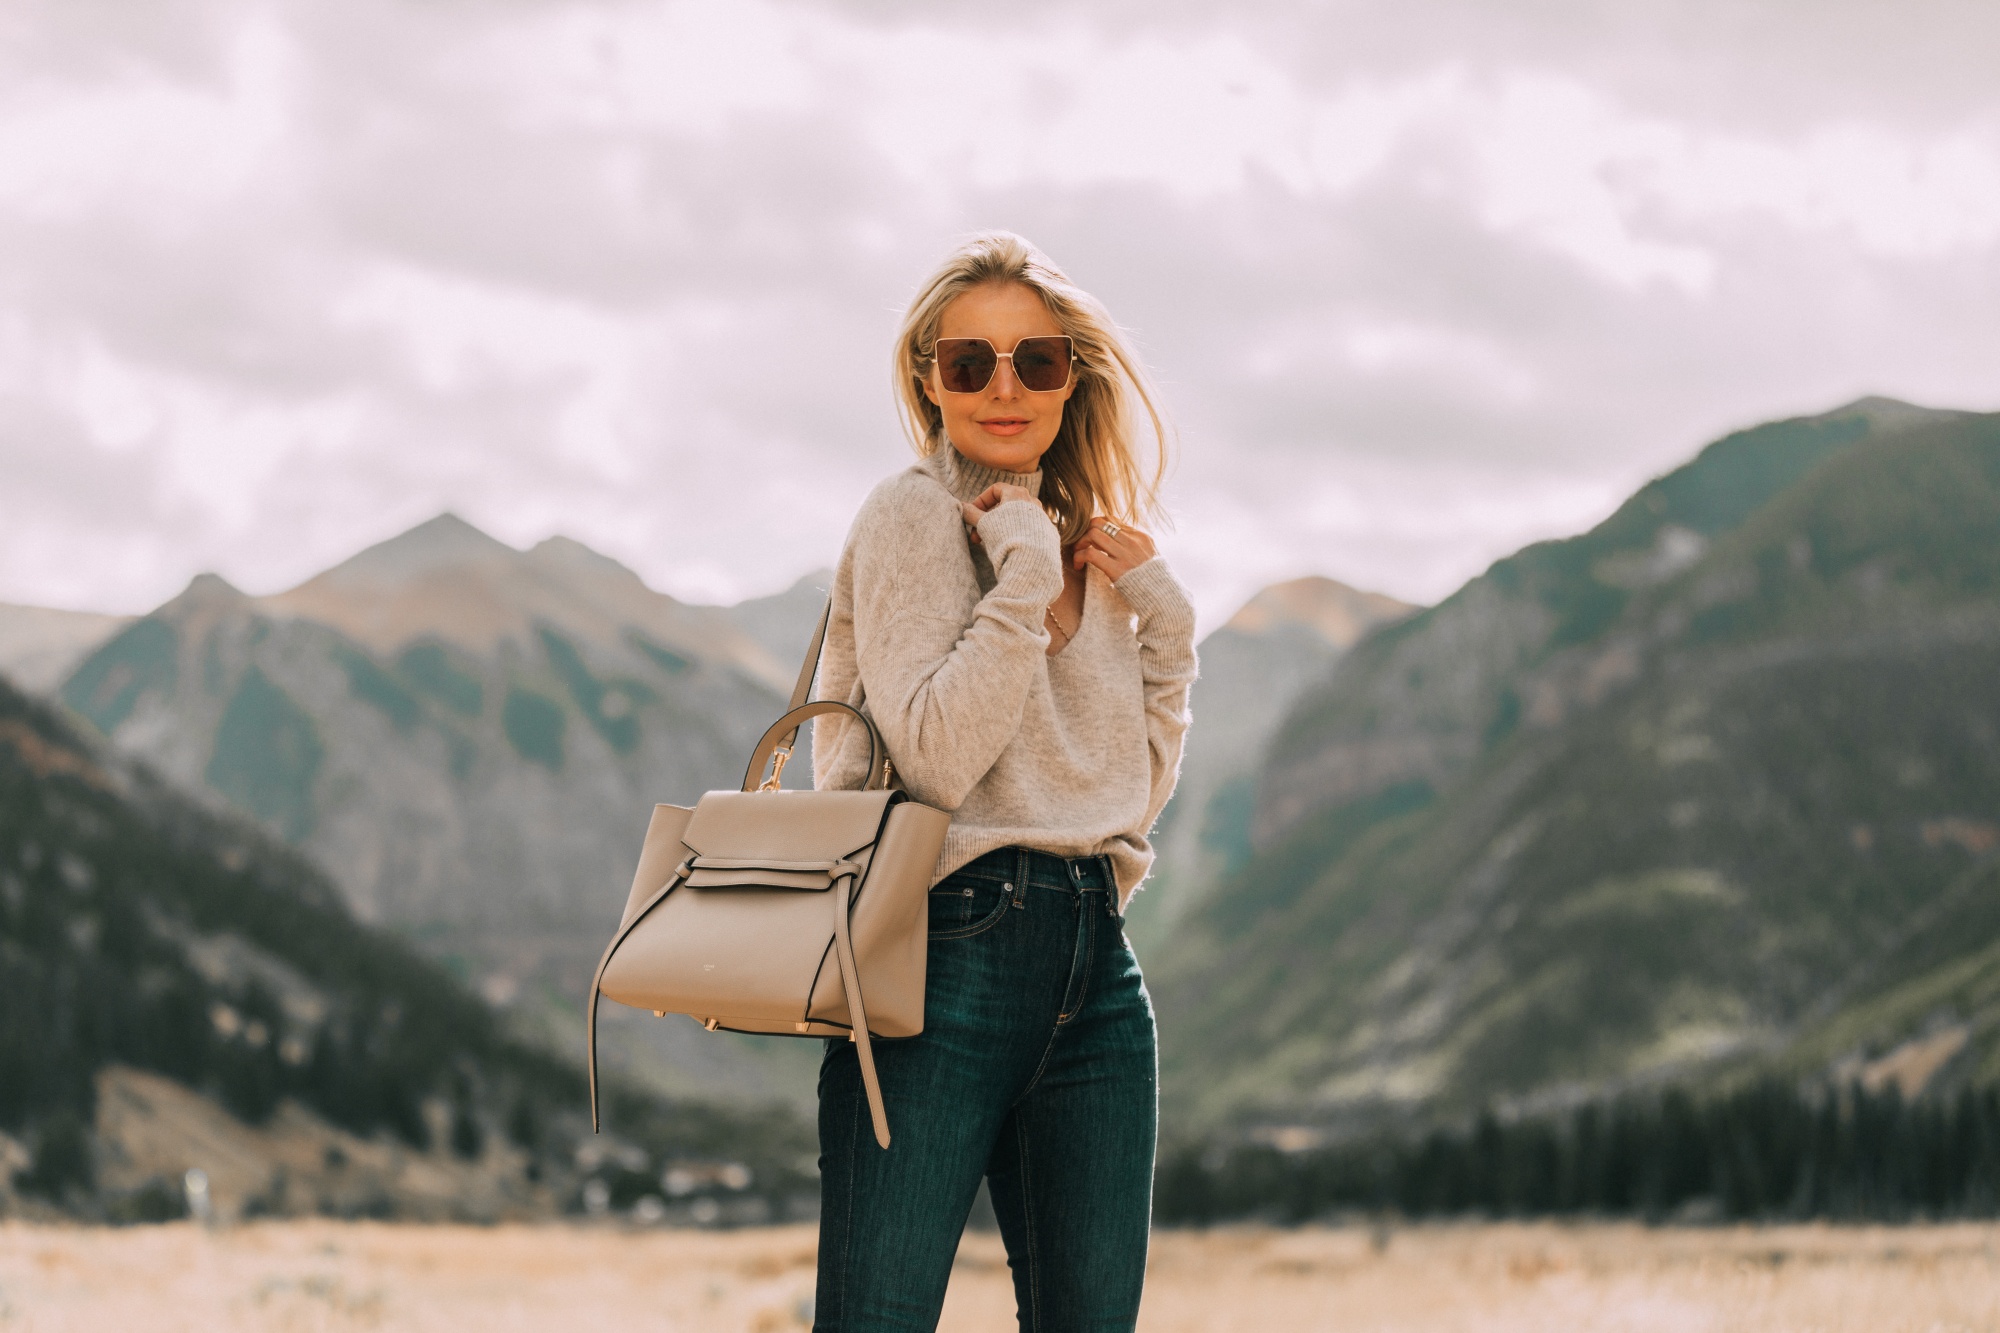 Designer Handbags For Fall, Fashion blogger Erin Busbee of BusbeeStyle.com carrying the Celine belt bag wearing jeans and a sweater in Telluride, CO